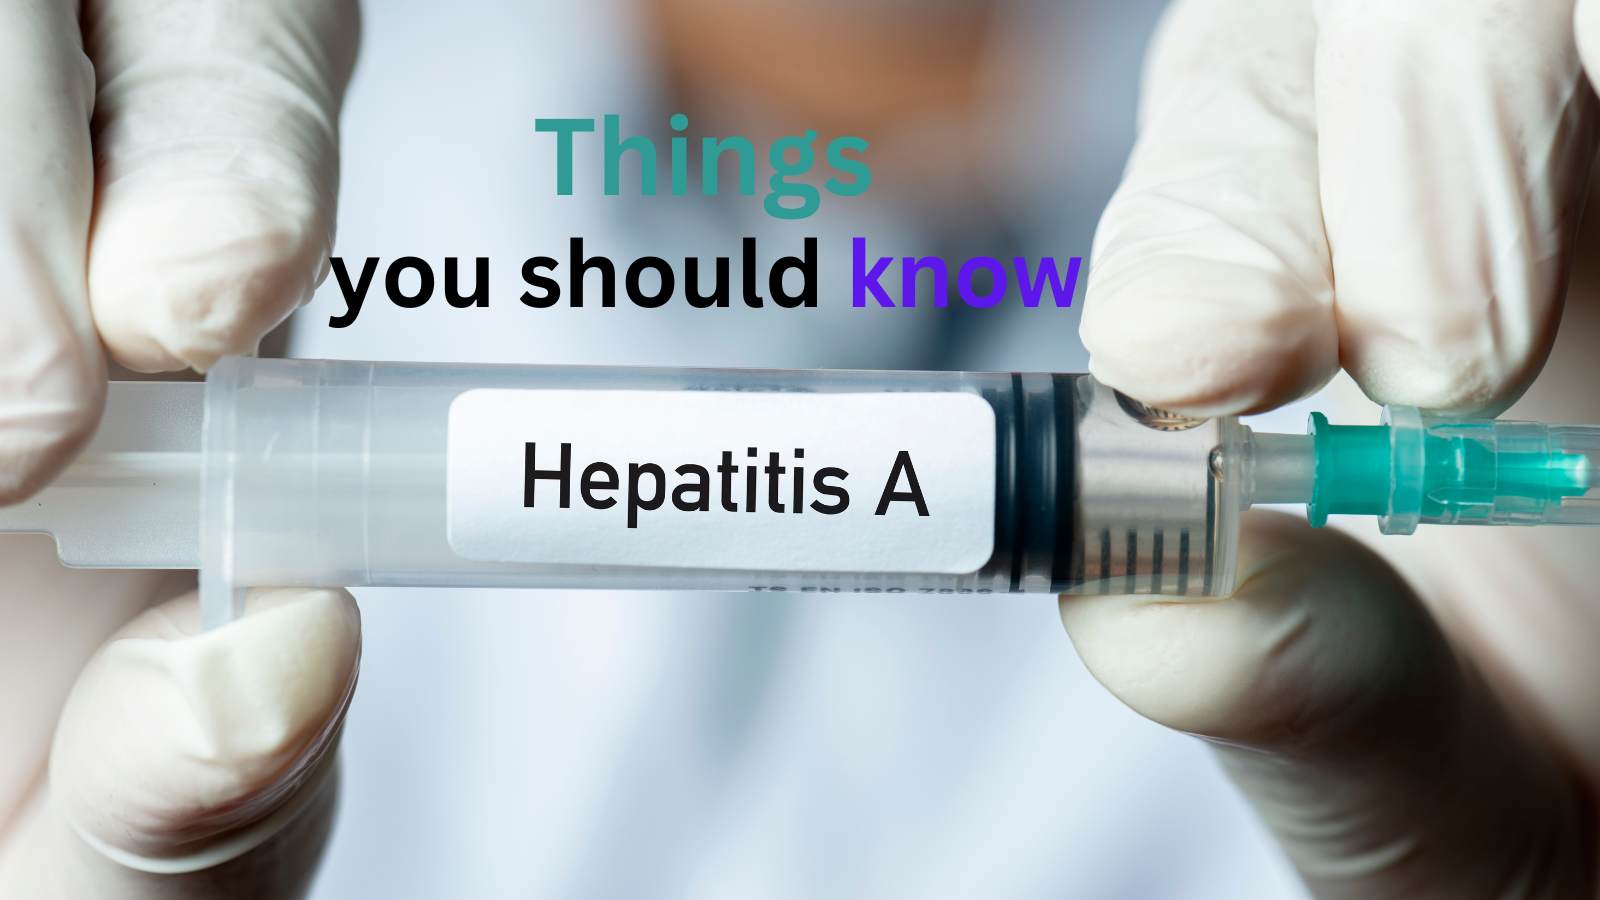 things you should know about heptatitis a